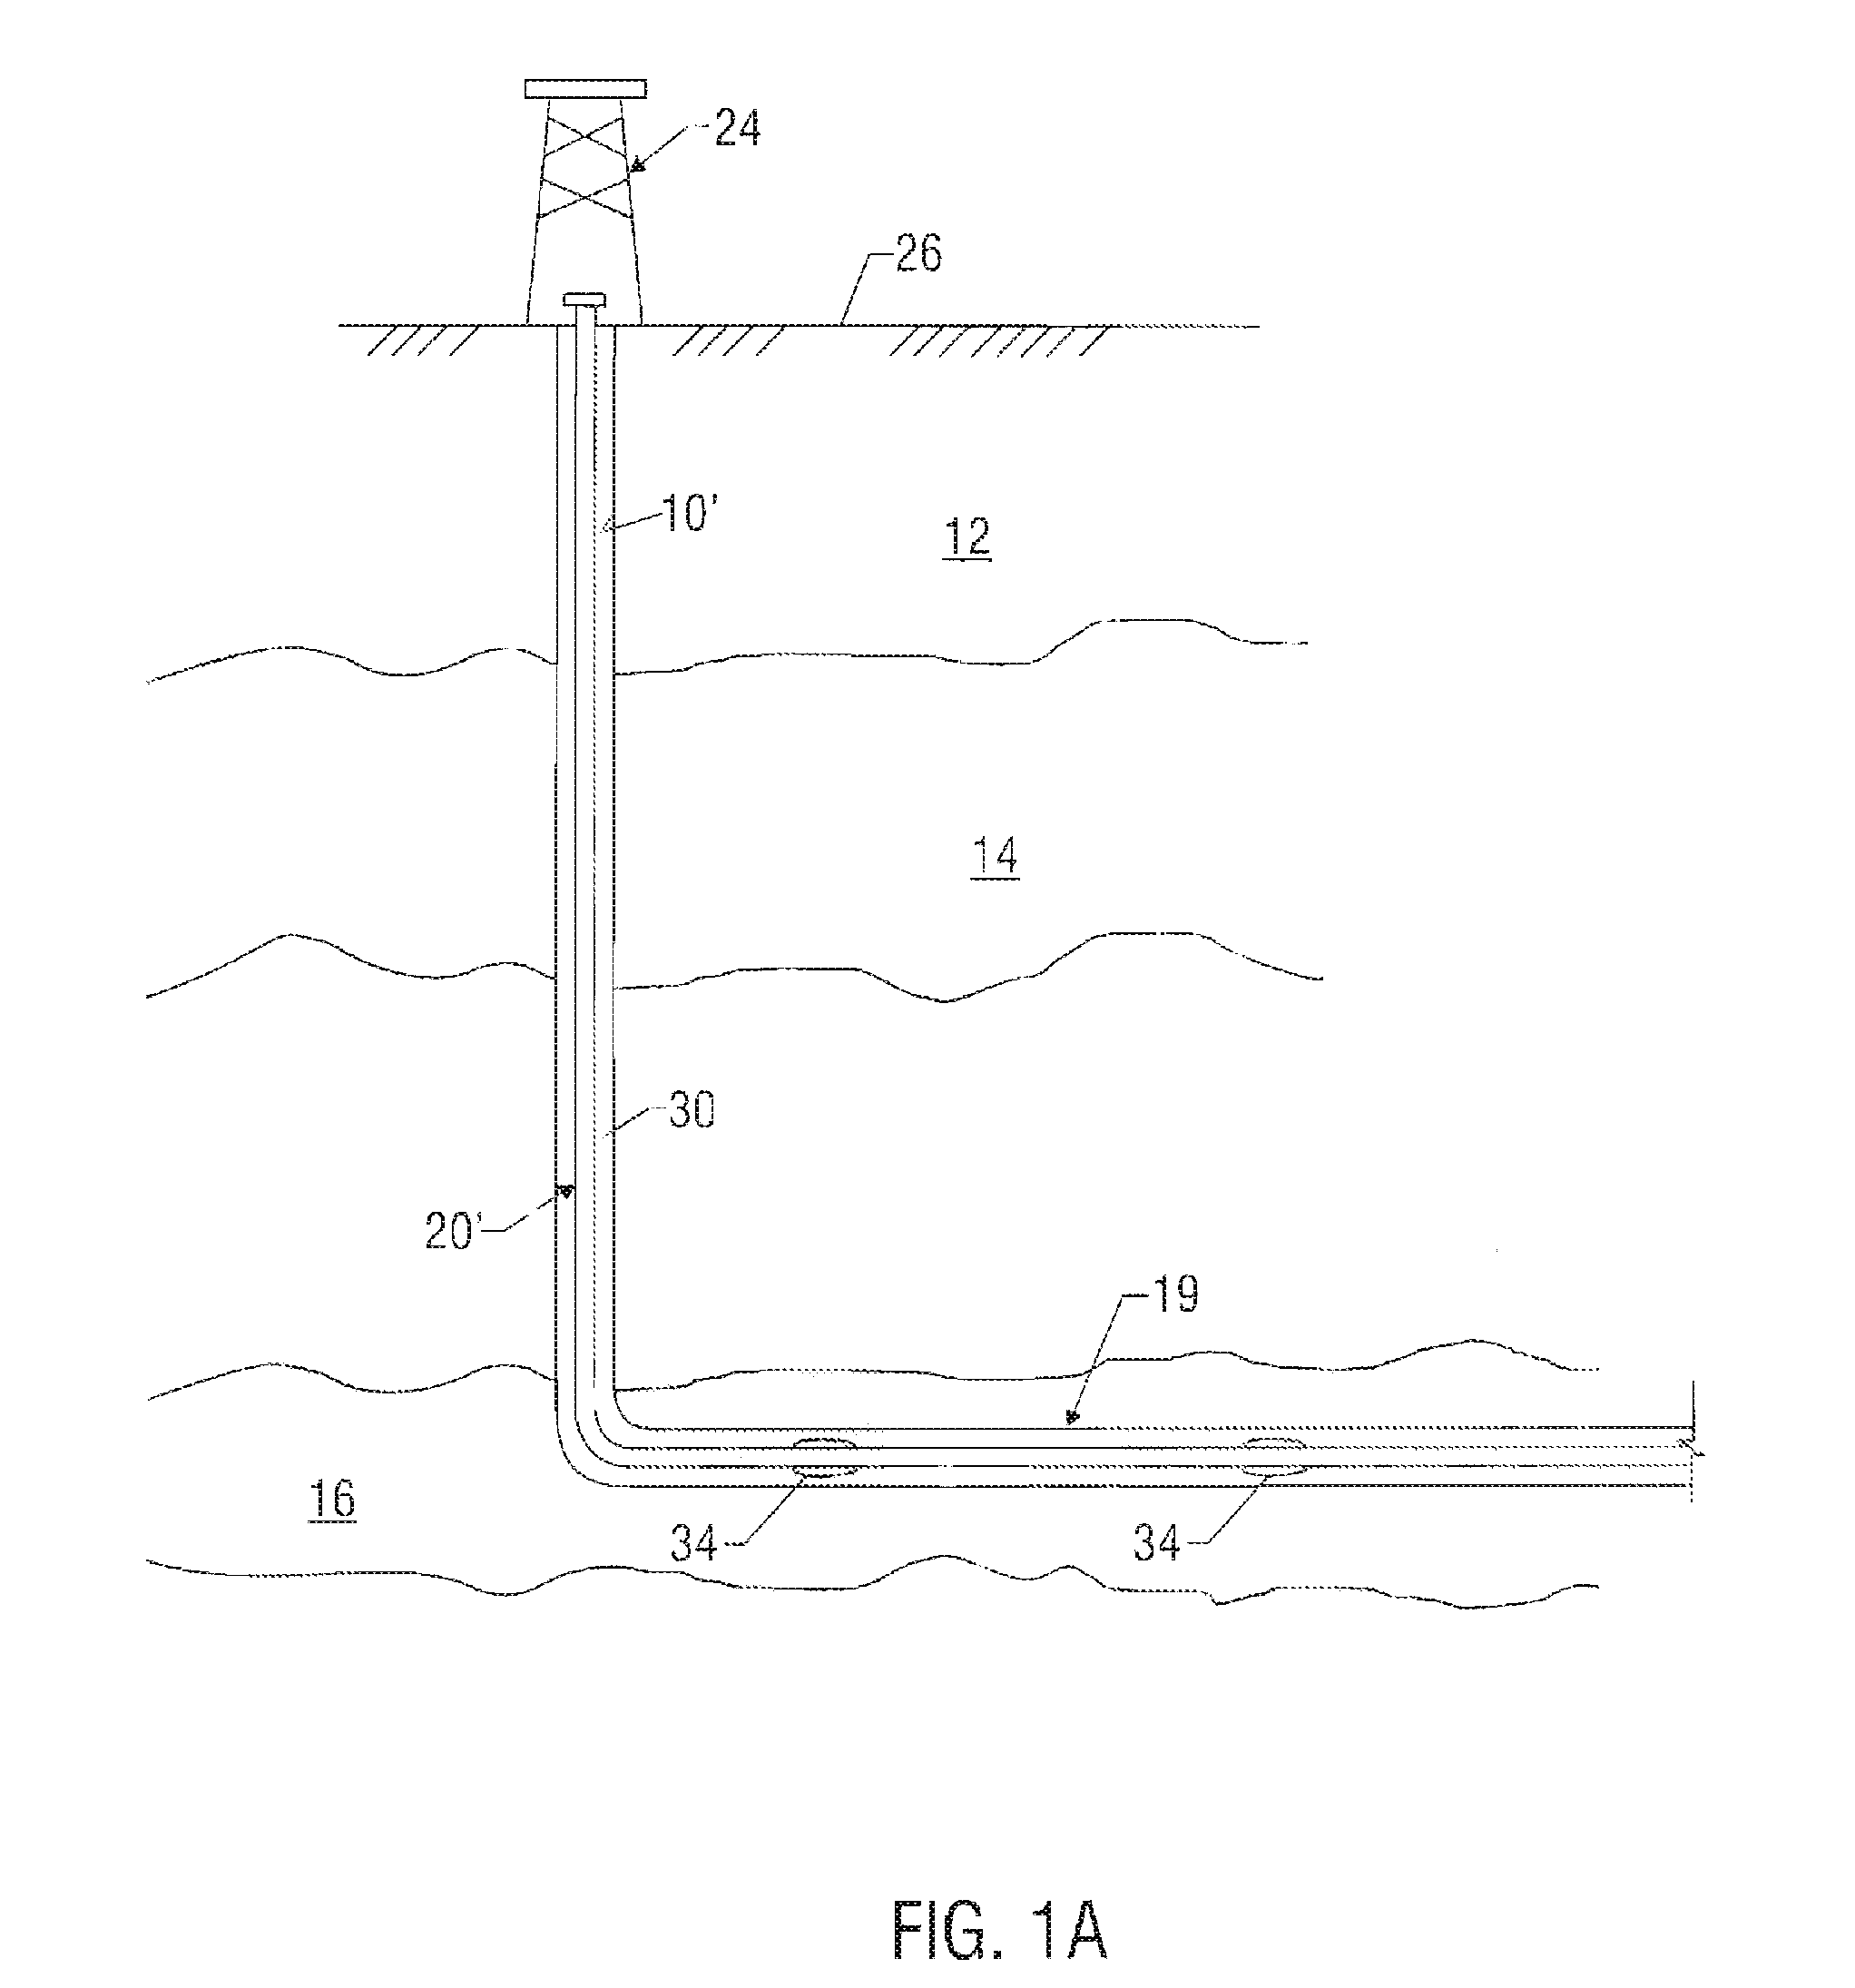 Downhole Inflow Control Device with Shut-Off Feature